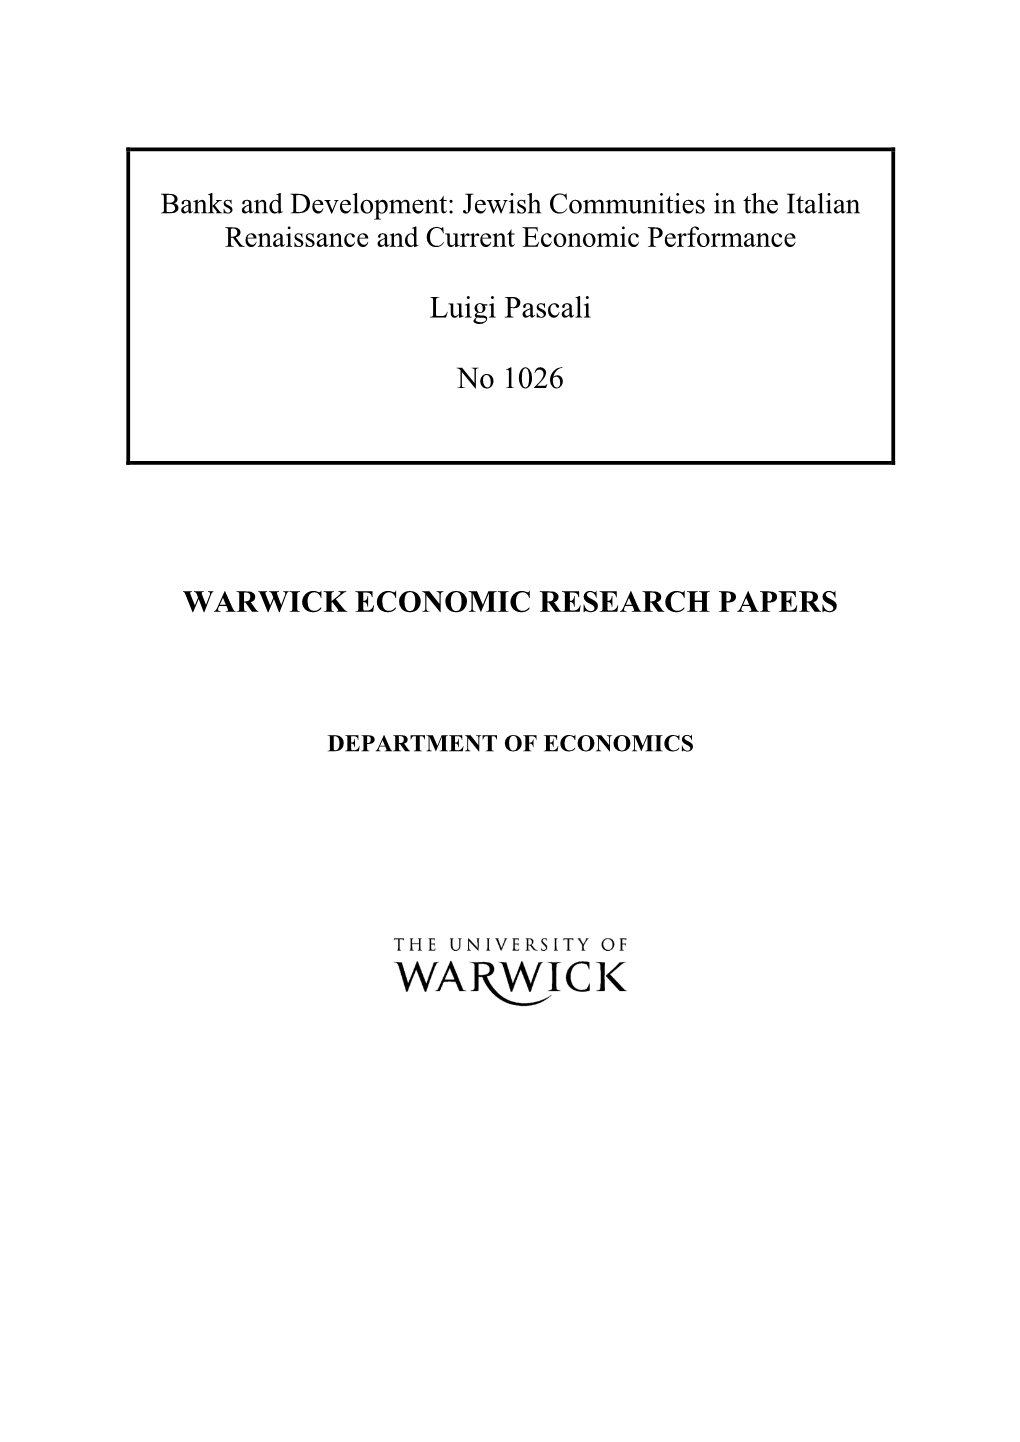 Banks and Development: Jewish Communities in the Italian Renaissance and Current Economic Performance